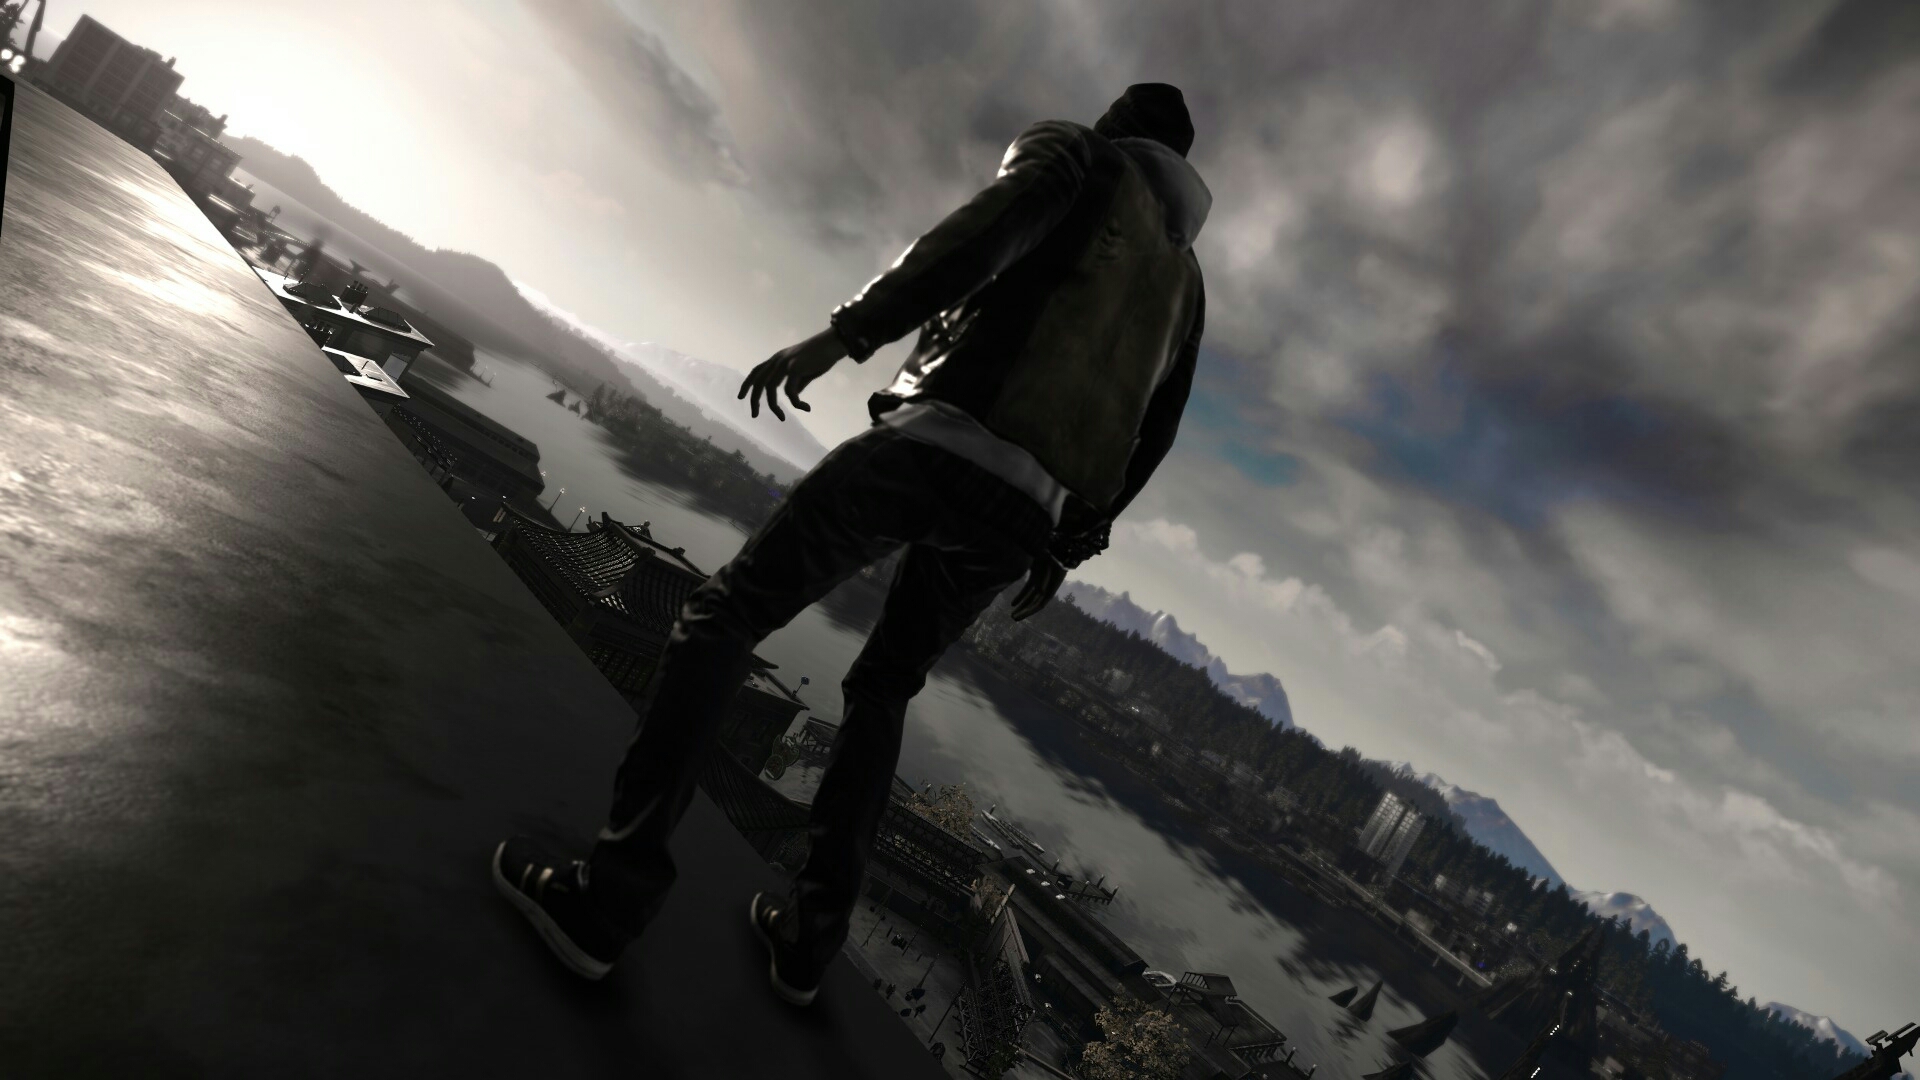 Video Game InFAMOUS Second Son 1920x1080